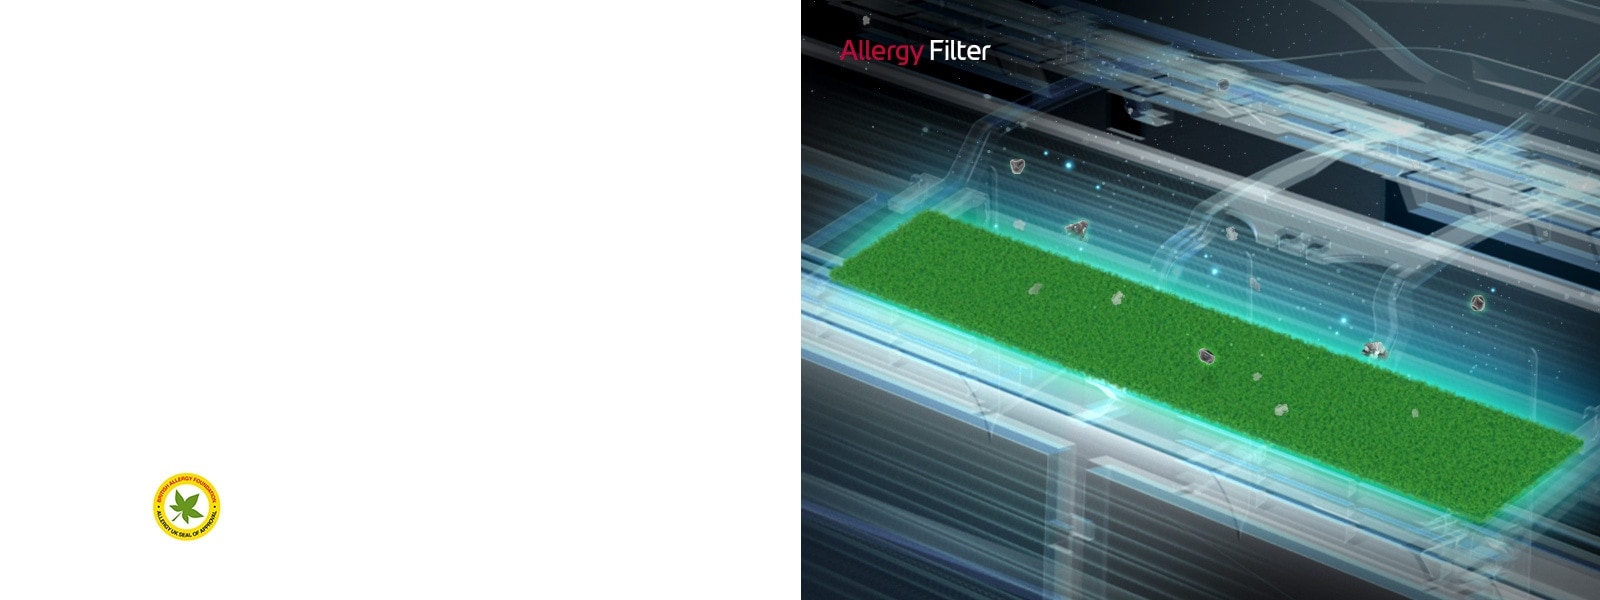 An image of the interior of the filtration system with a view of the Allergy Filter. The other parts are darker as the allergy filter is focused on with neon light surrounding it. Dust particles are being caught in the filter. Reads Allergy Filter in the upper left corner. The BAF logo is next to the image.